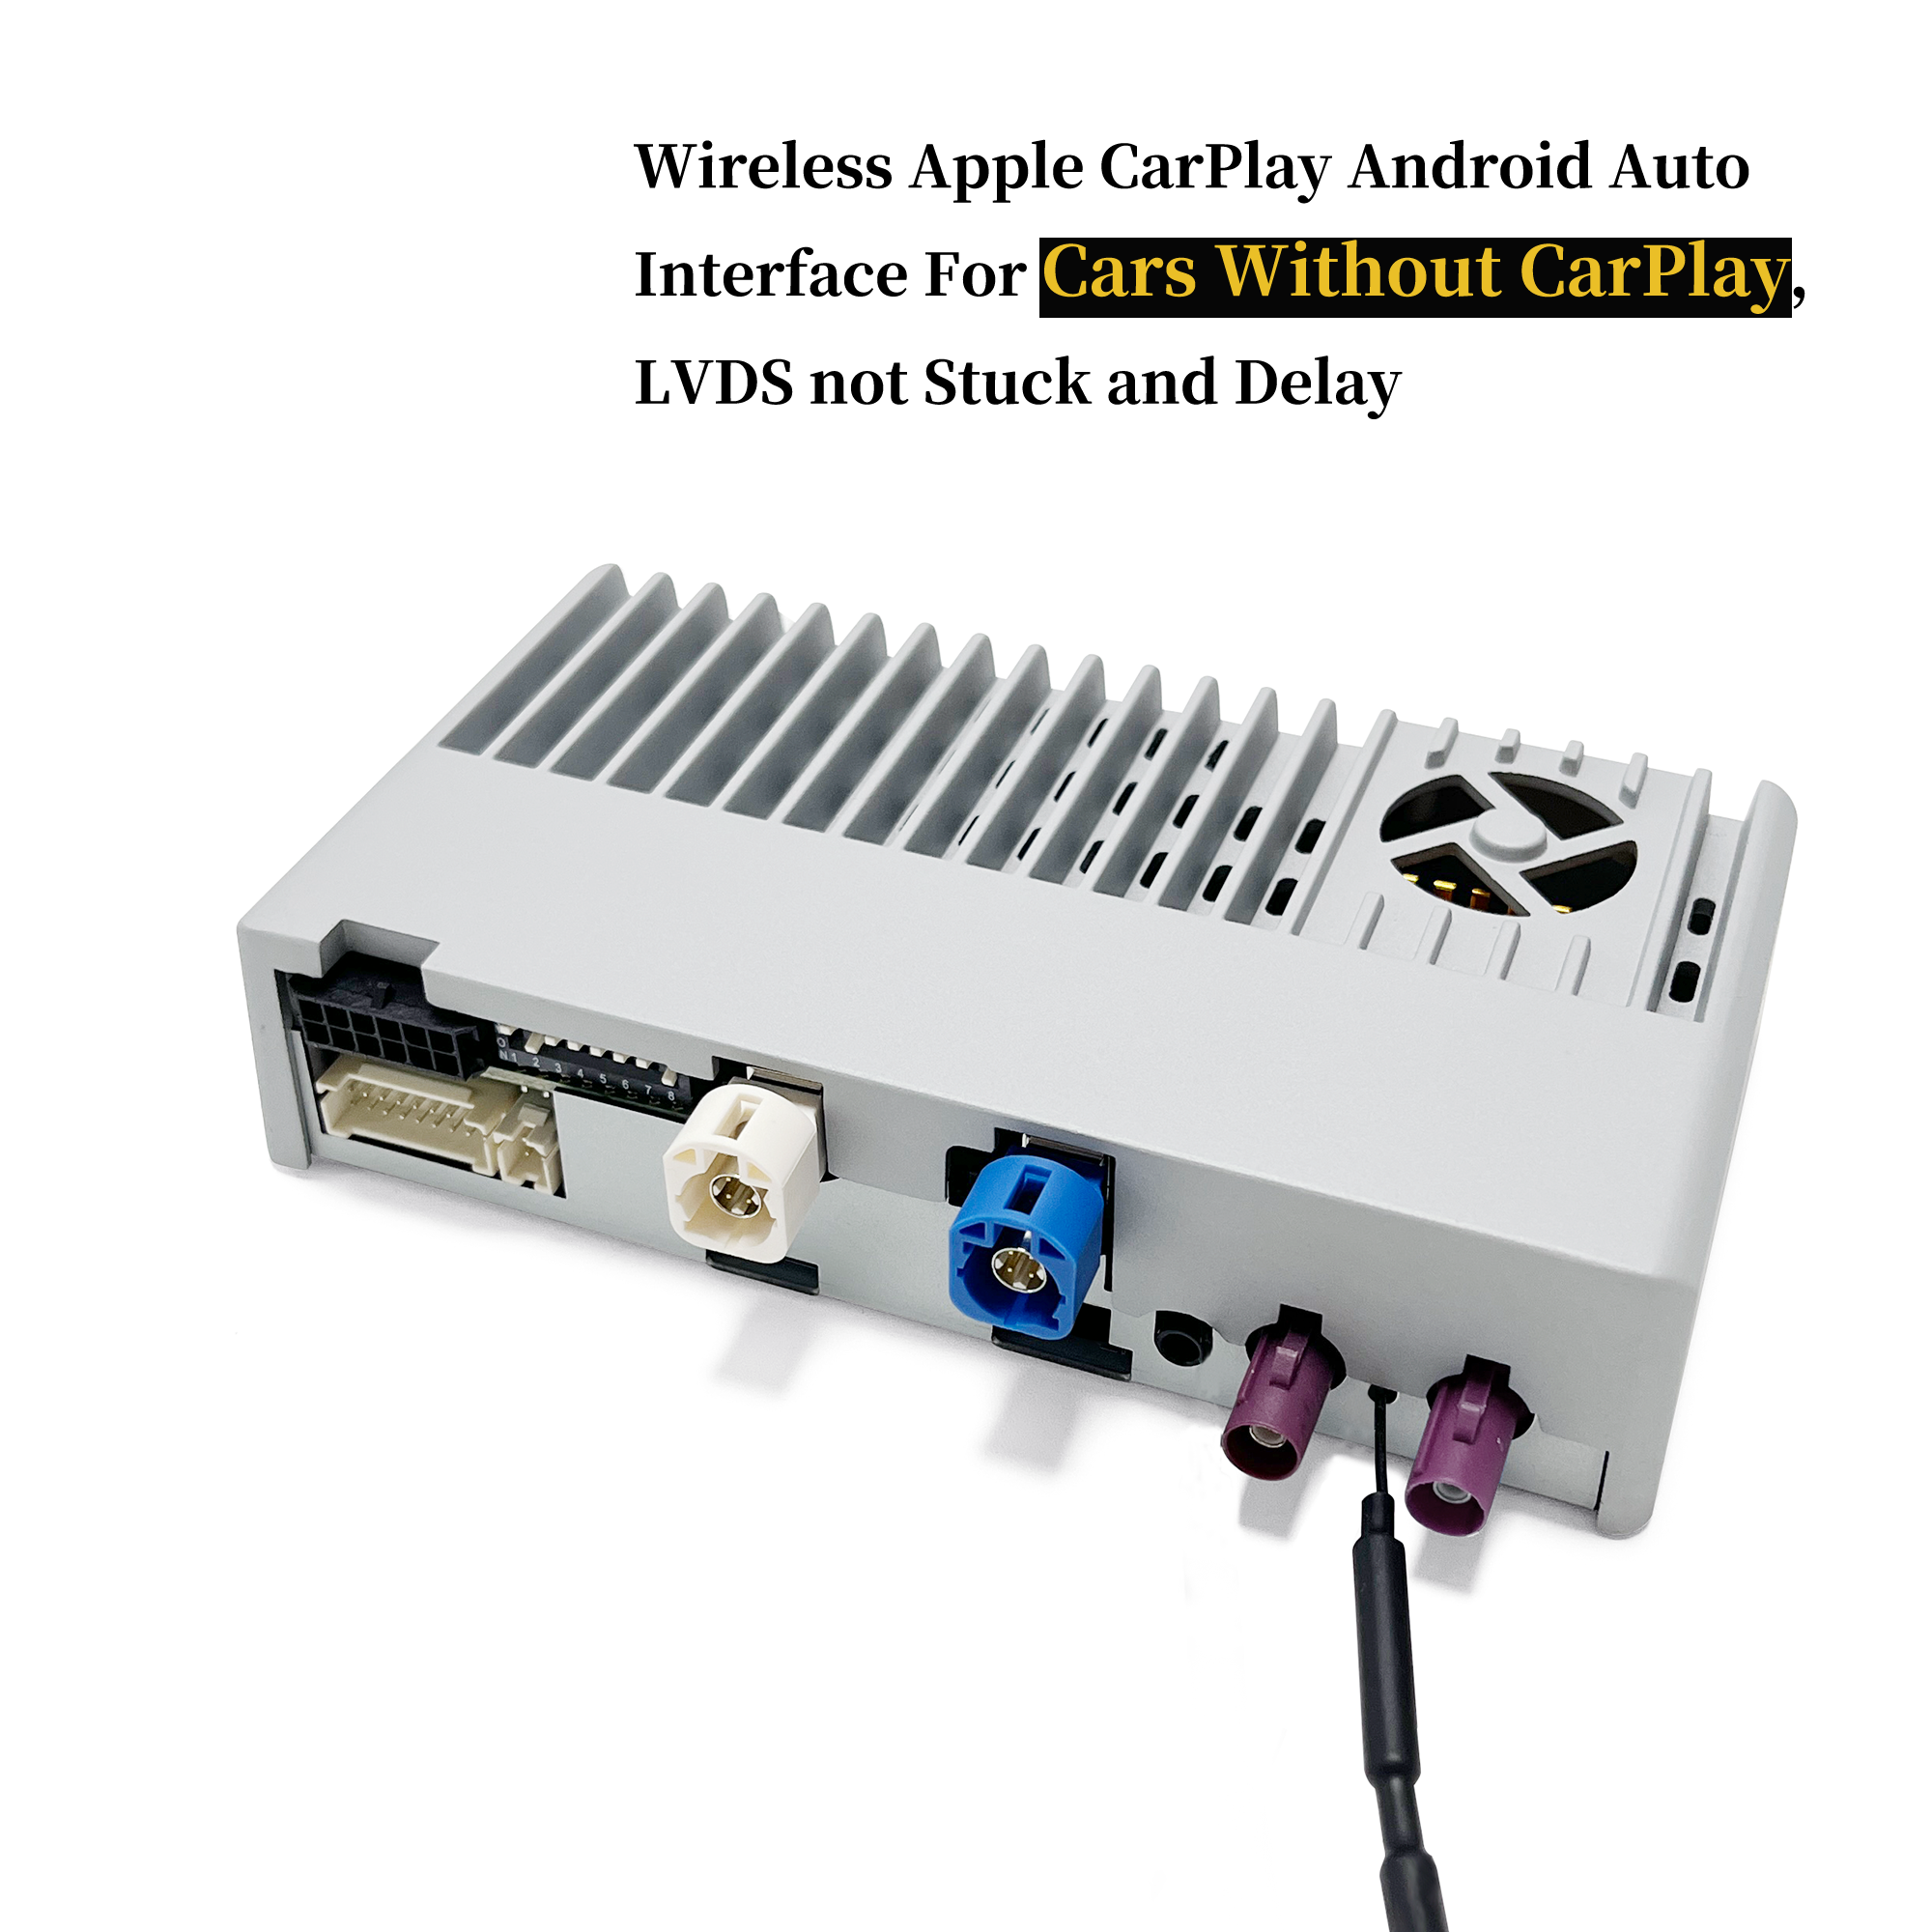 Apple CarPlay Screen CarPlay Box For Volvo XC90 Wireless Android Auto interface Wi-Fi LVDS Interface Is for Special Car, Compatible Car With Or Without OEM Wired CarPlay